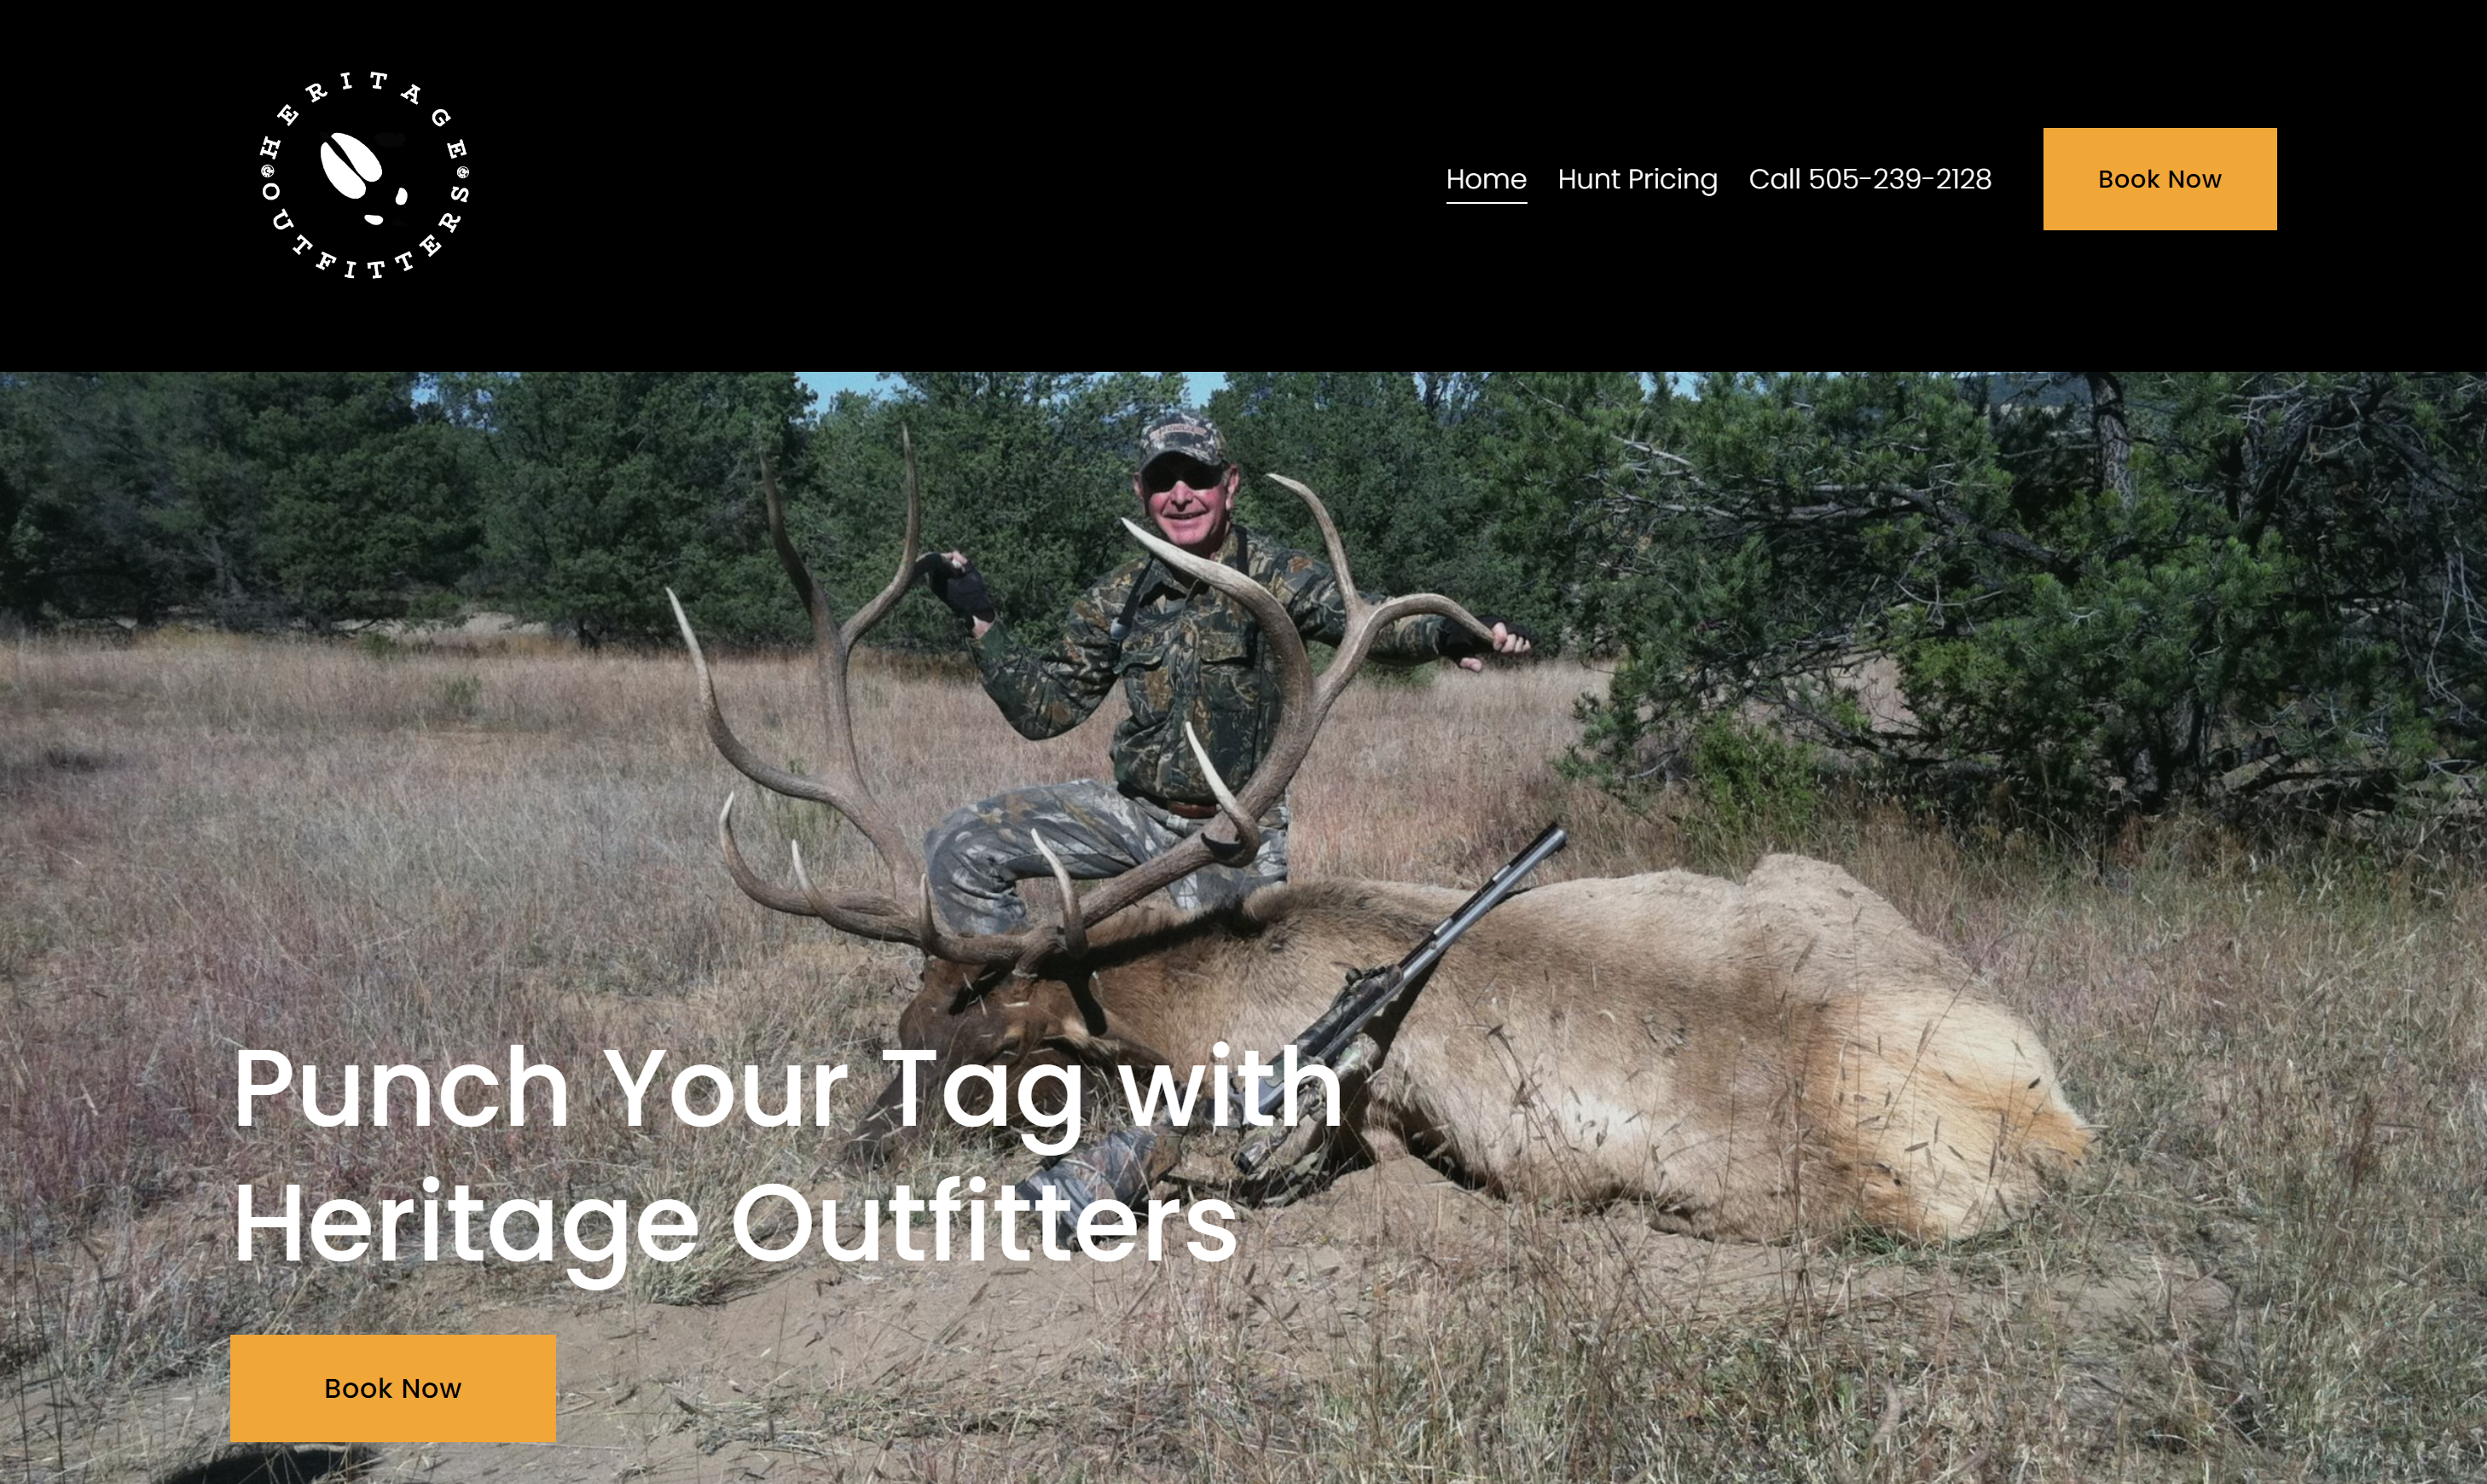 Outfitter home page